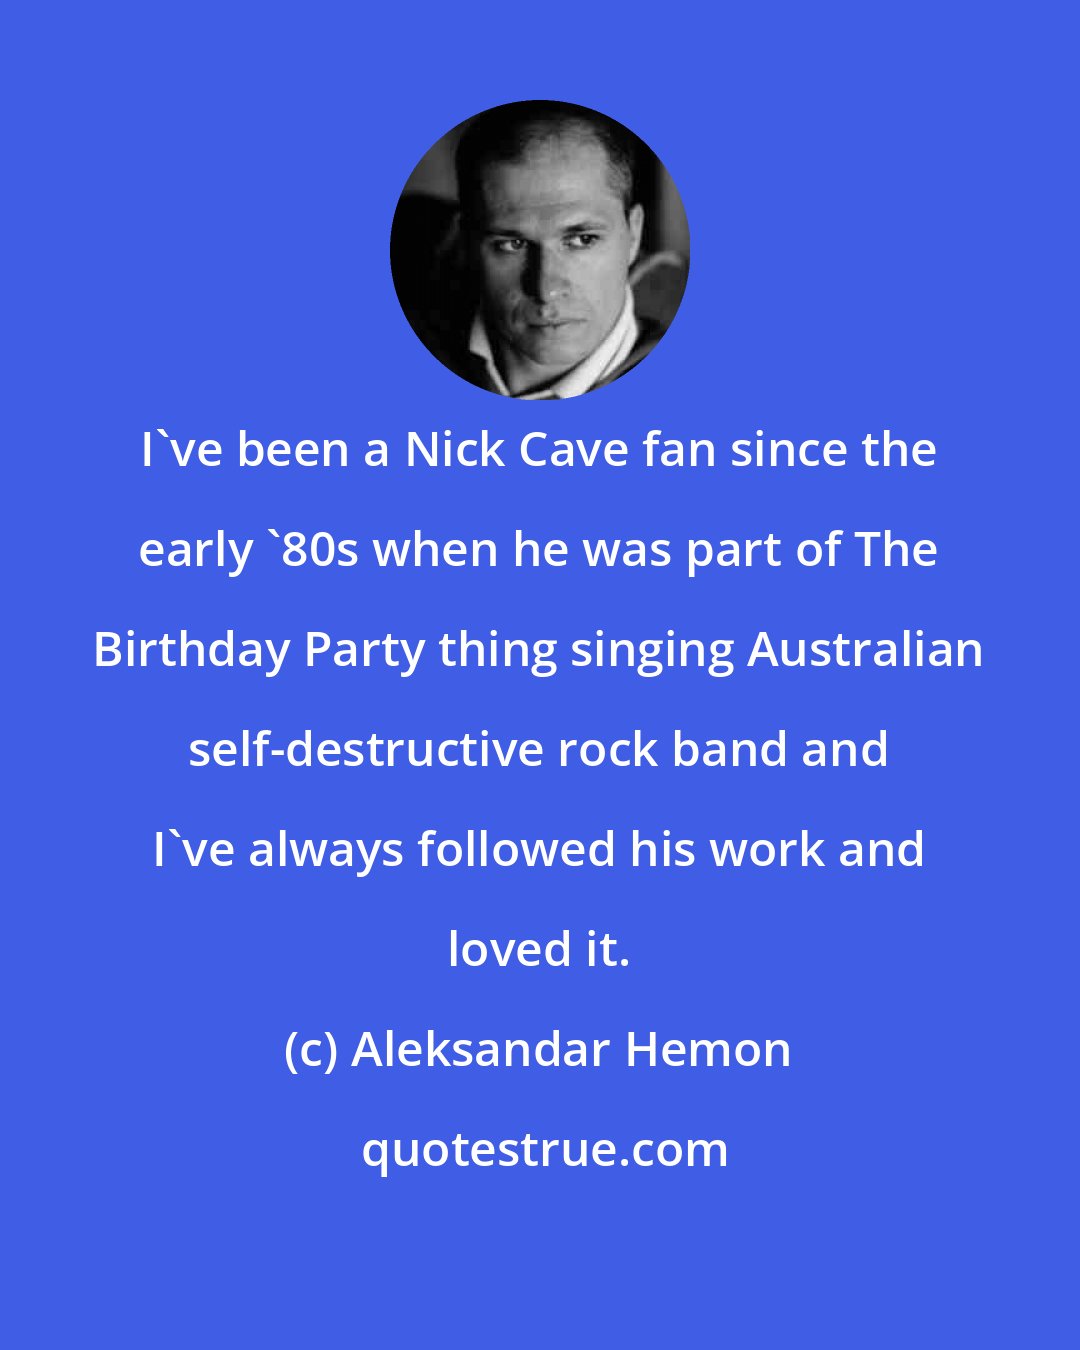 Aleksandar Hemon: I've been a Nick Cave fan since the early '80s when he was part of The Birthday Party thing singing Australian self-destructive rock band and I've always followed his work and loved it.